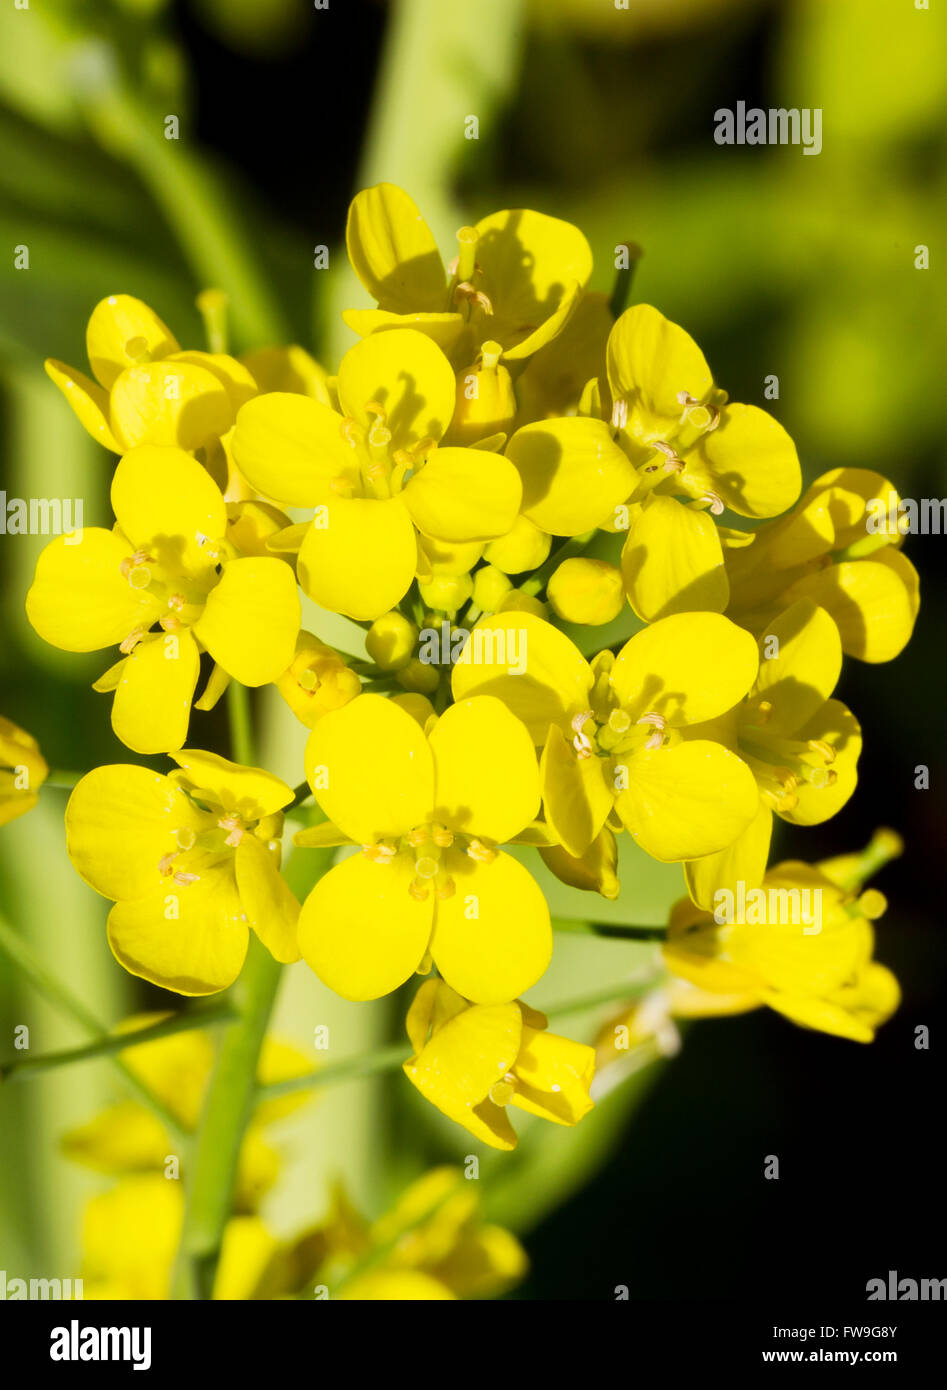 Flowers of the Bok Choy (Brassica rapa subsp. Chinensis) Chinese cabbage Stock Photo